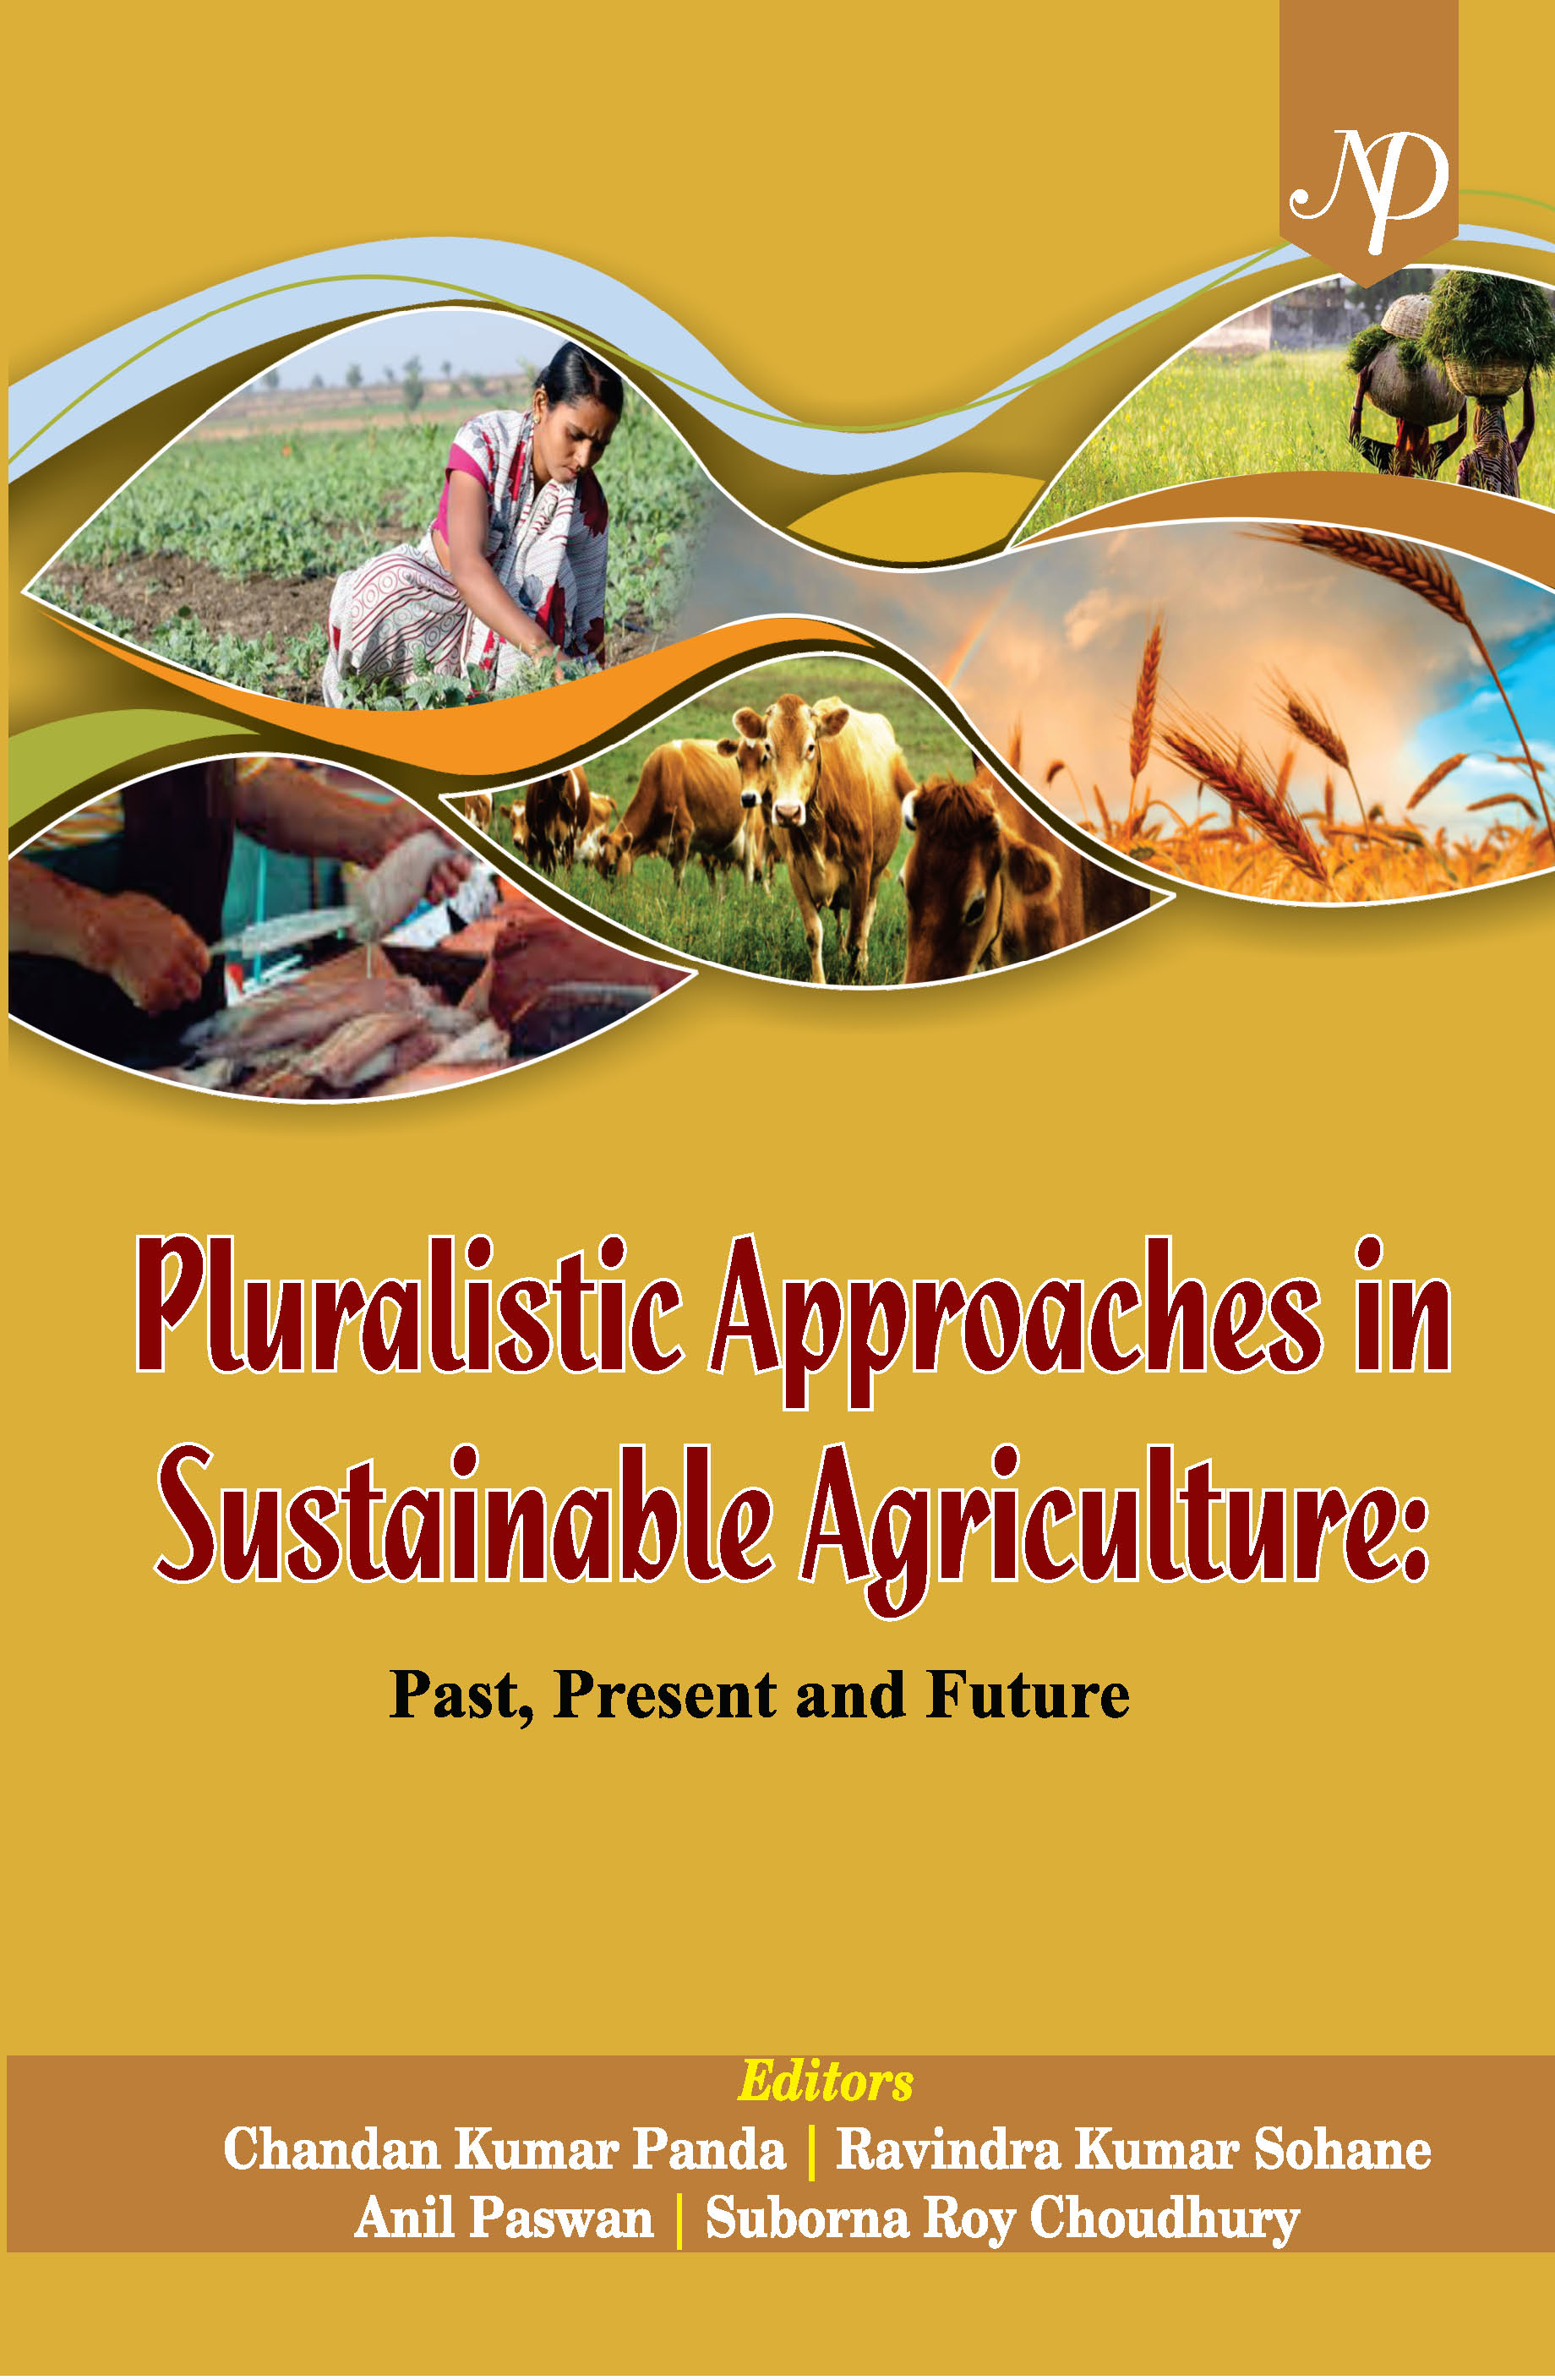 Pluralistic Approaches in Sustainable Agriculture: Past, Present and Future